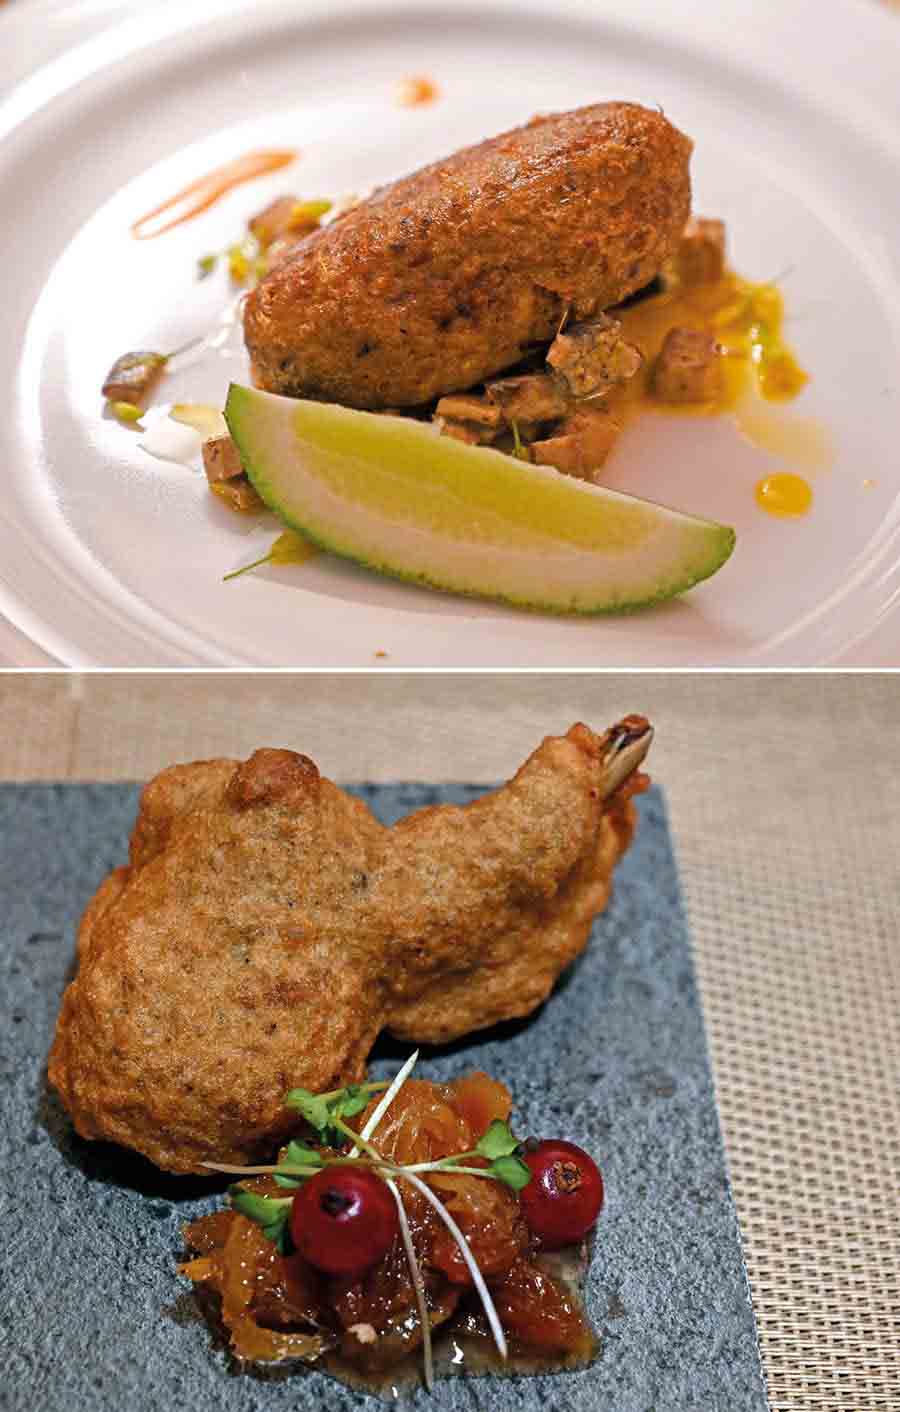 The seven-course menu began with two starters: Kofta Shammi Kebab Mahi with Gorbho Mocha Salad, which was a freshwater fish kebab with a banana flower salad, and Telai Kebab with Adar Murabba, a tender and juicy rib chop deep fried in yoghurt batter with sweet ginger preserve 